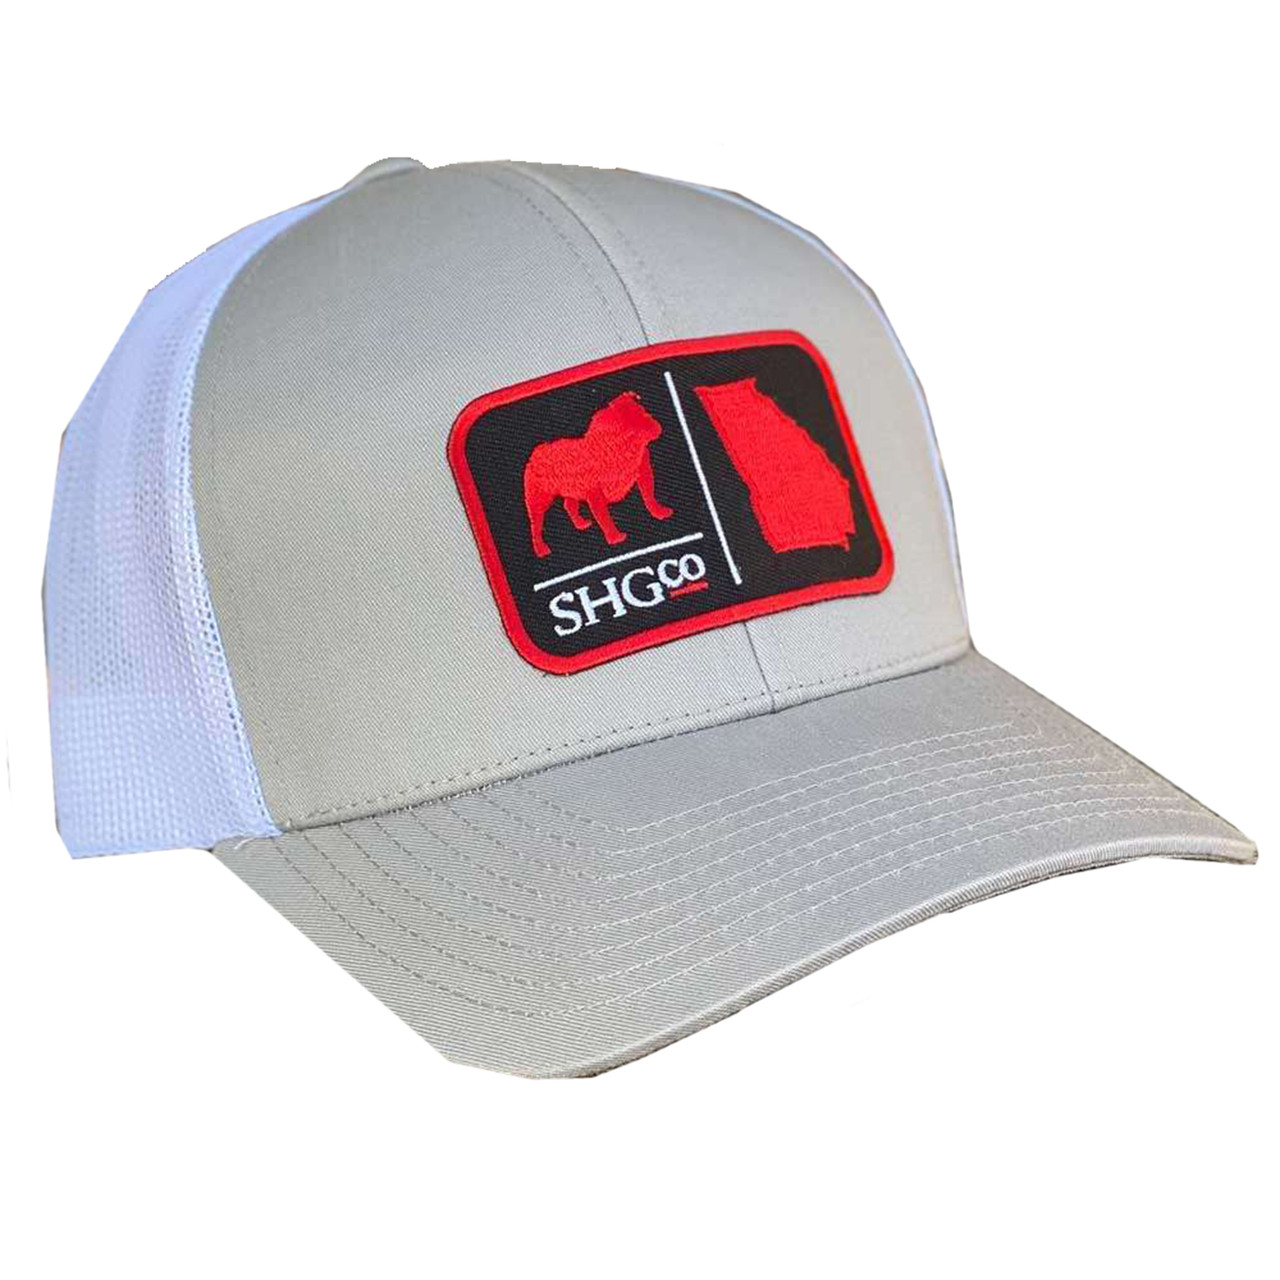 Custom Hat Patches and Headwear for Virtual Events - Georgia